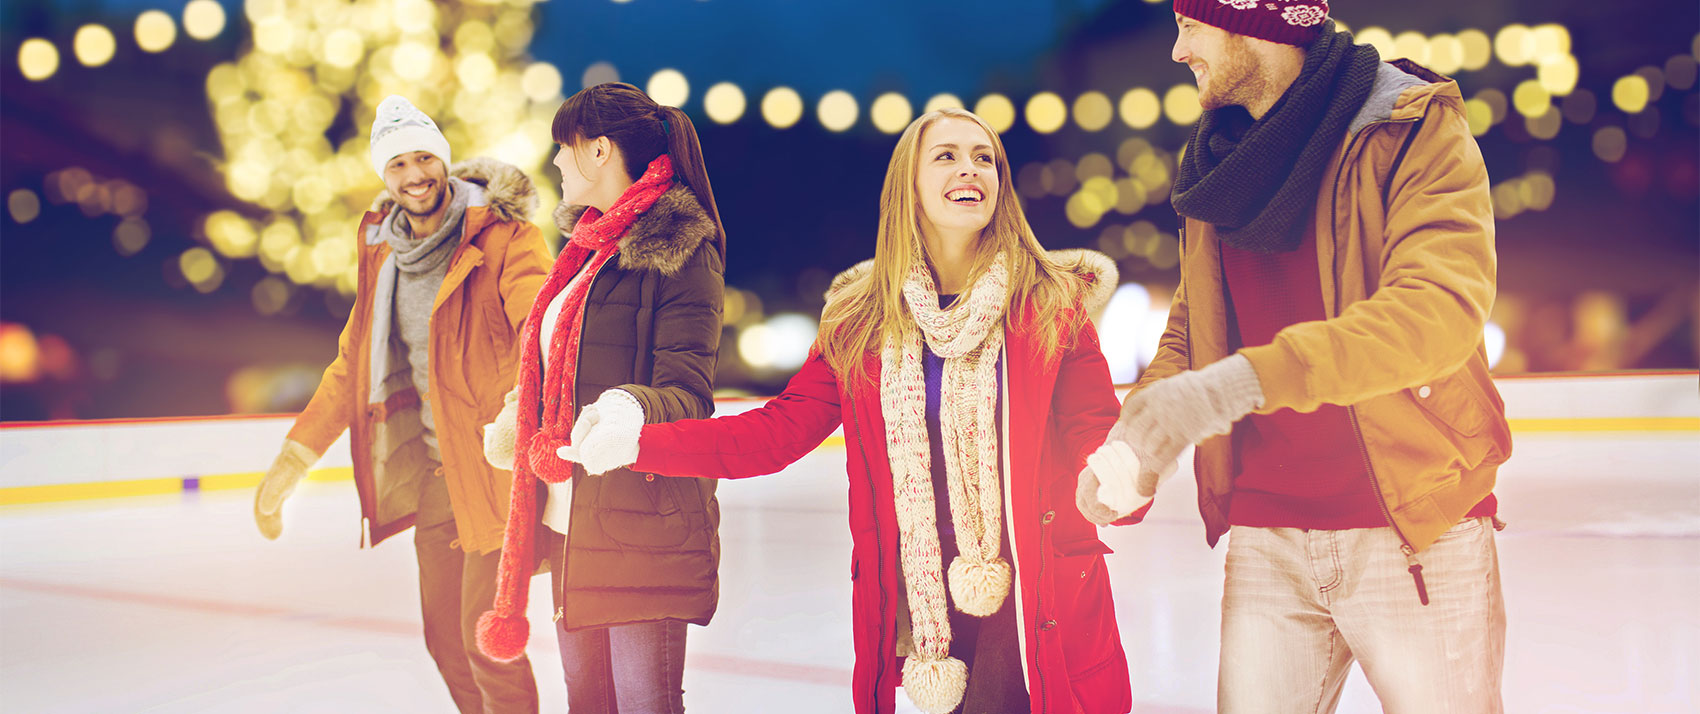 Two Couples Skating at an Ice Rink